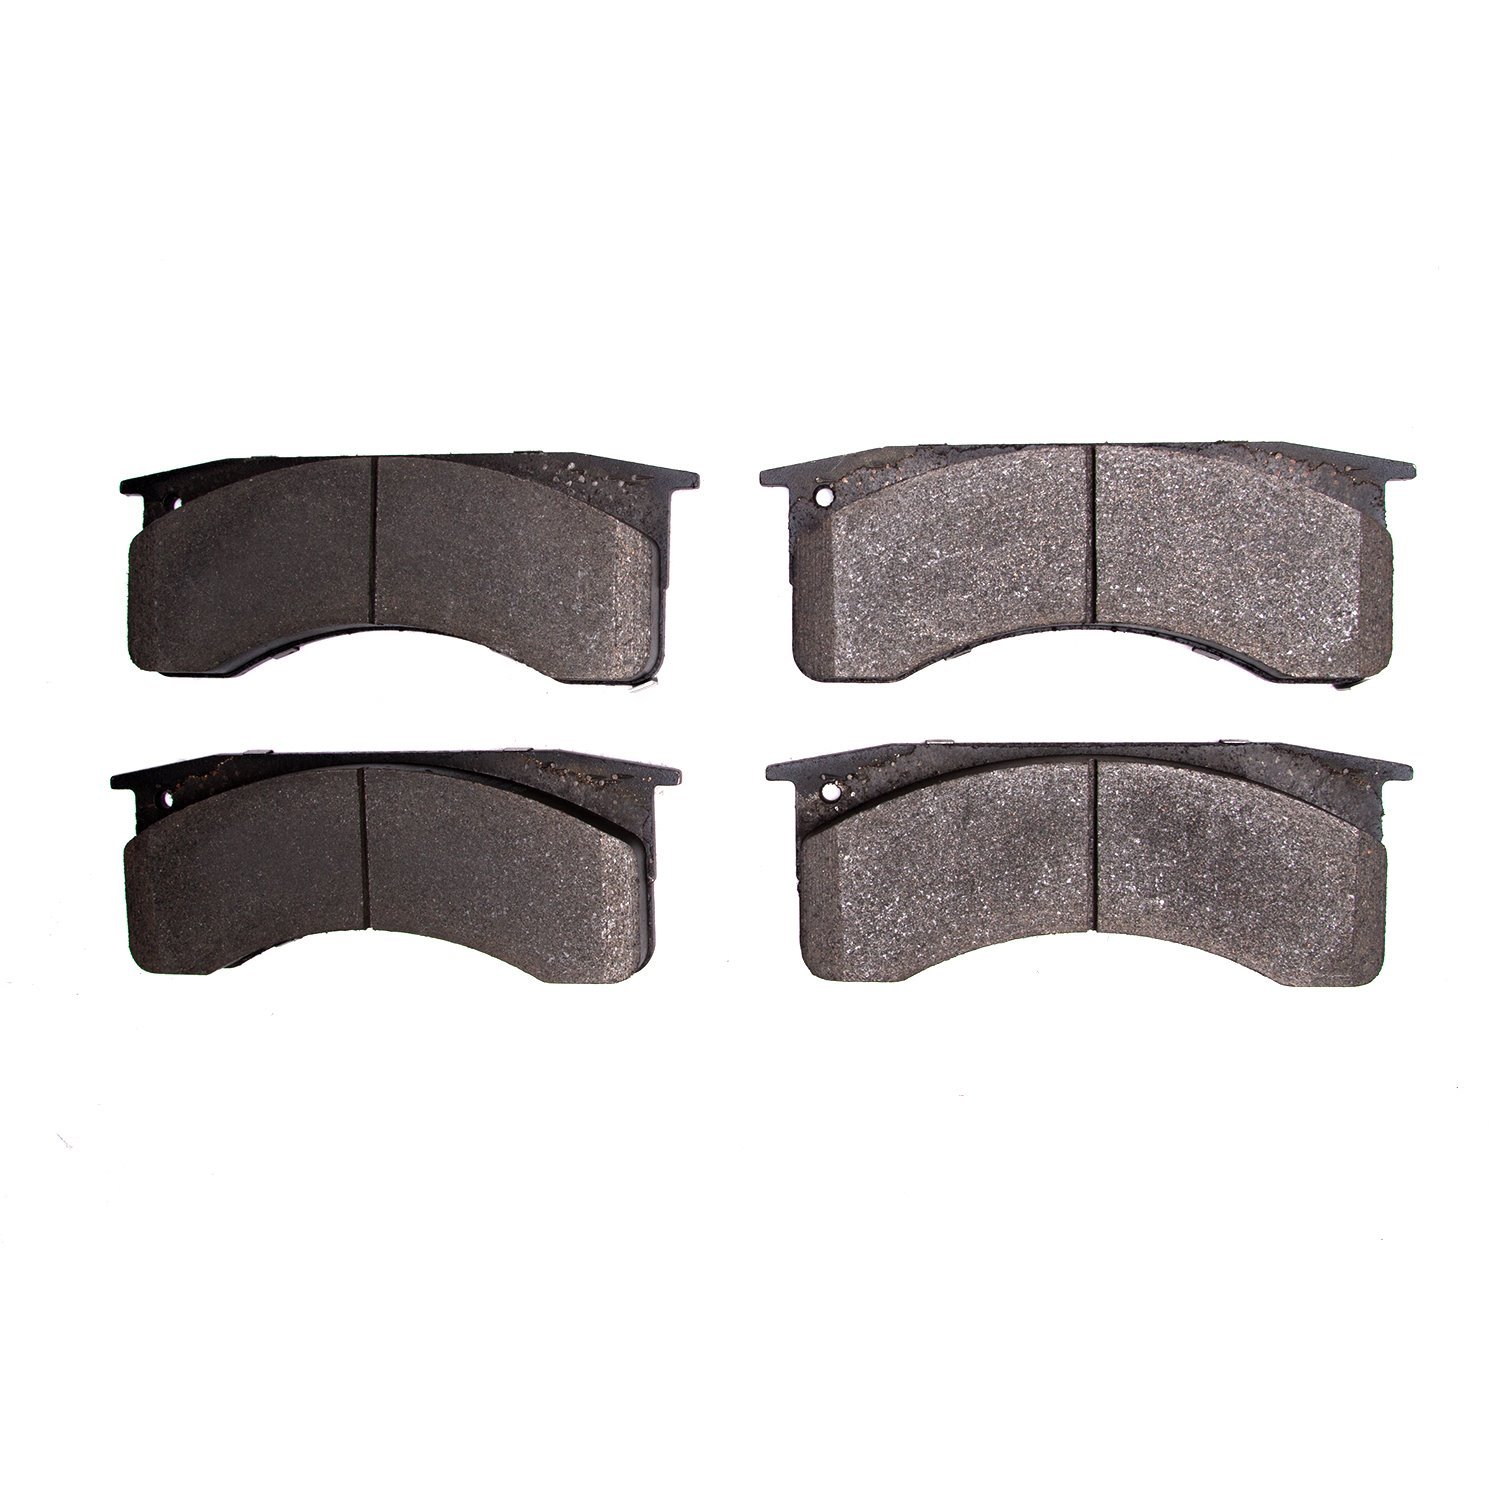 Semi-Metallic Brake Pads, Fits Select Multiple Makes/Models, Position: Rear & Front